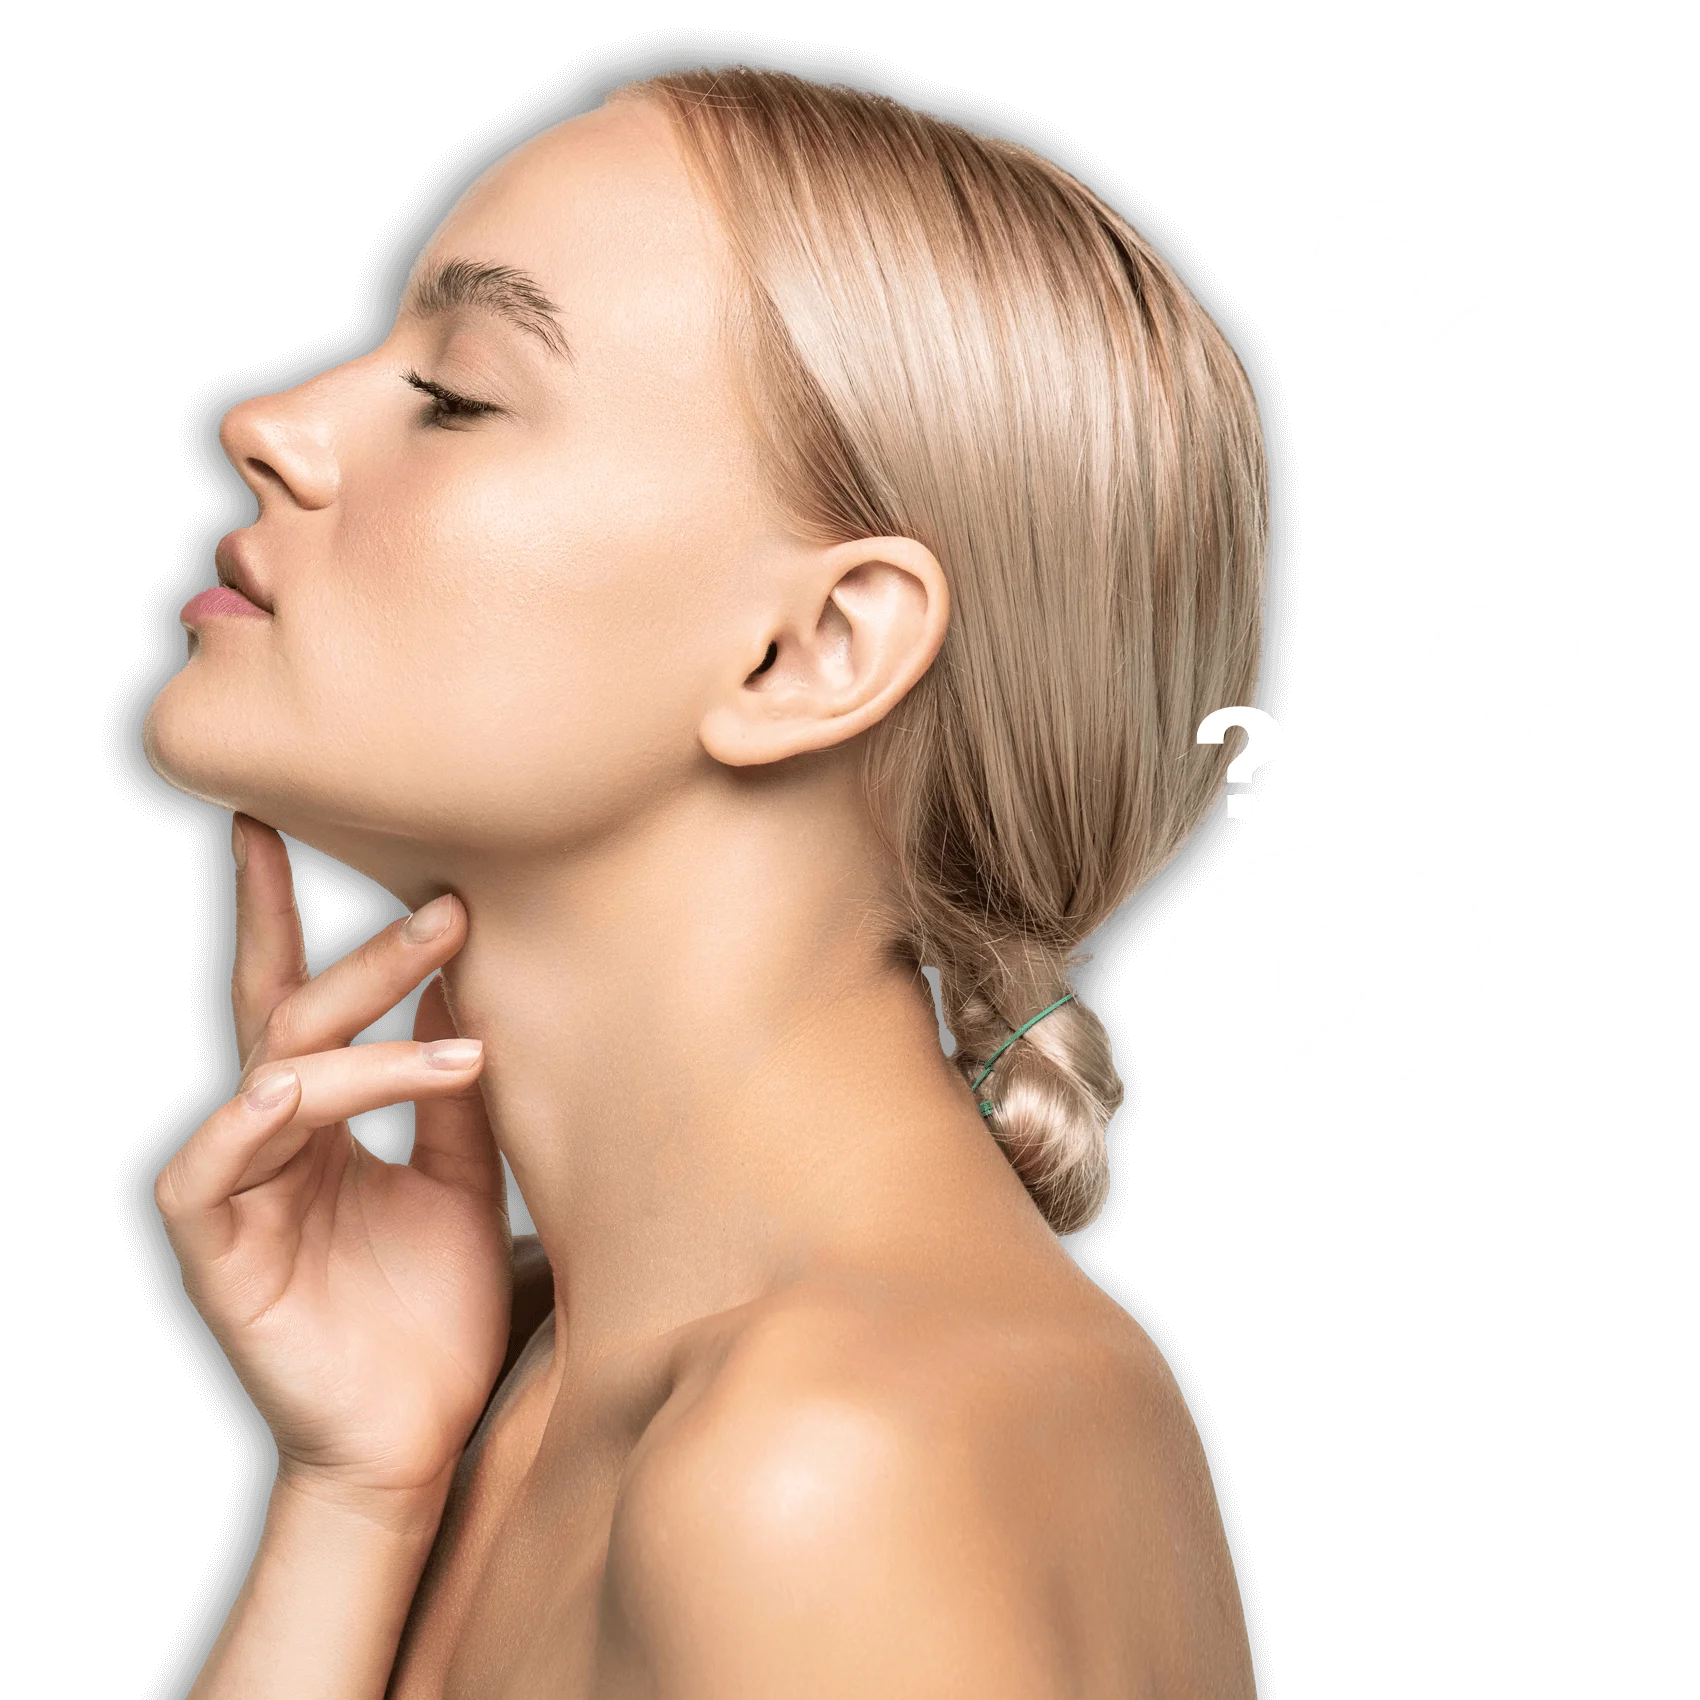 How Much Does Chin Beautification Surgery Cost